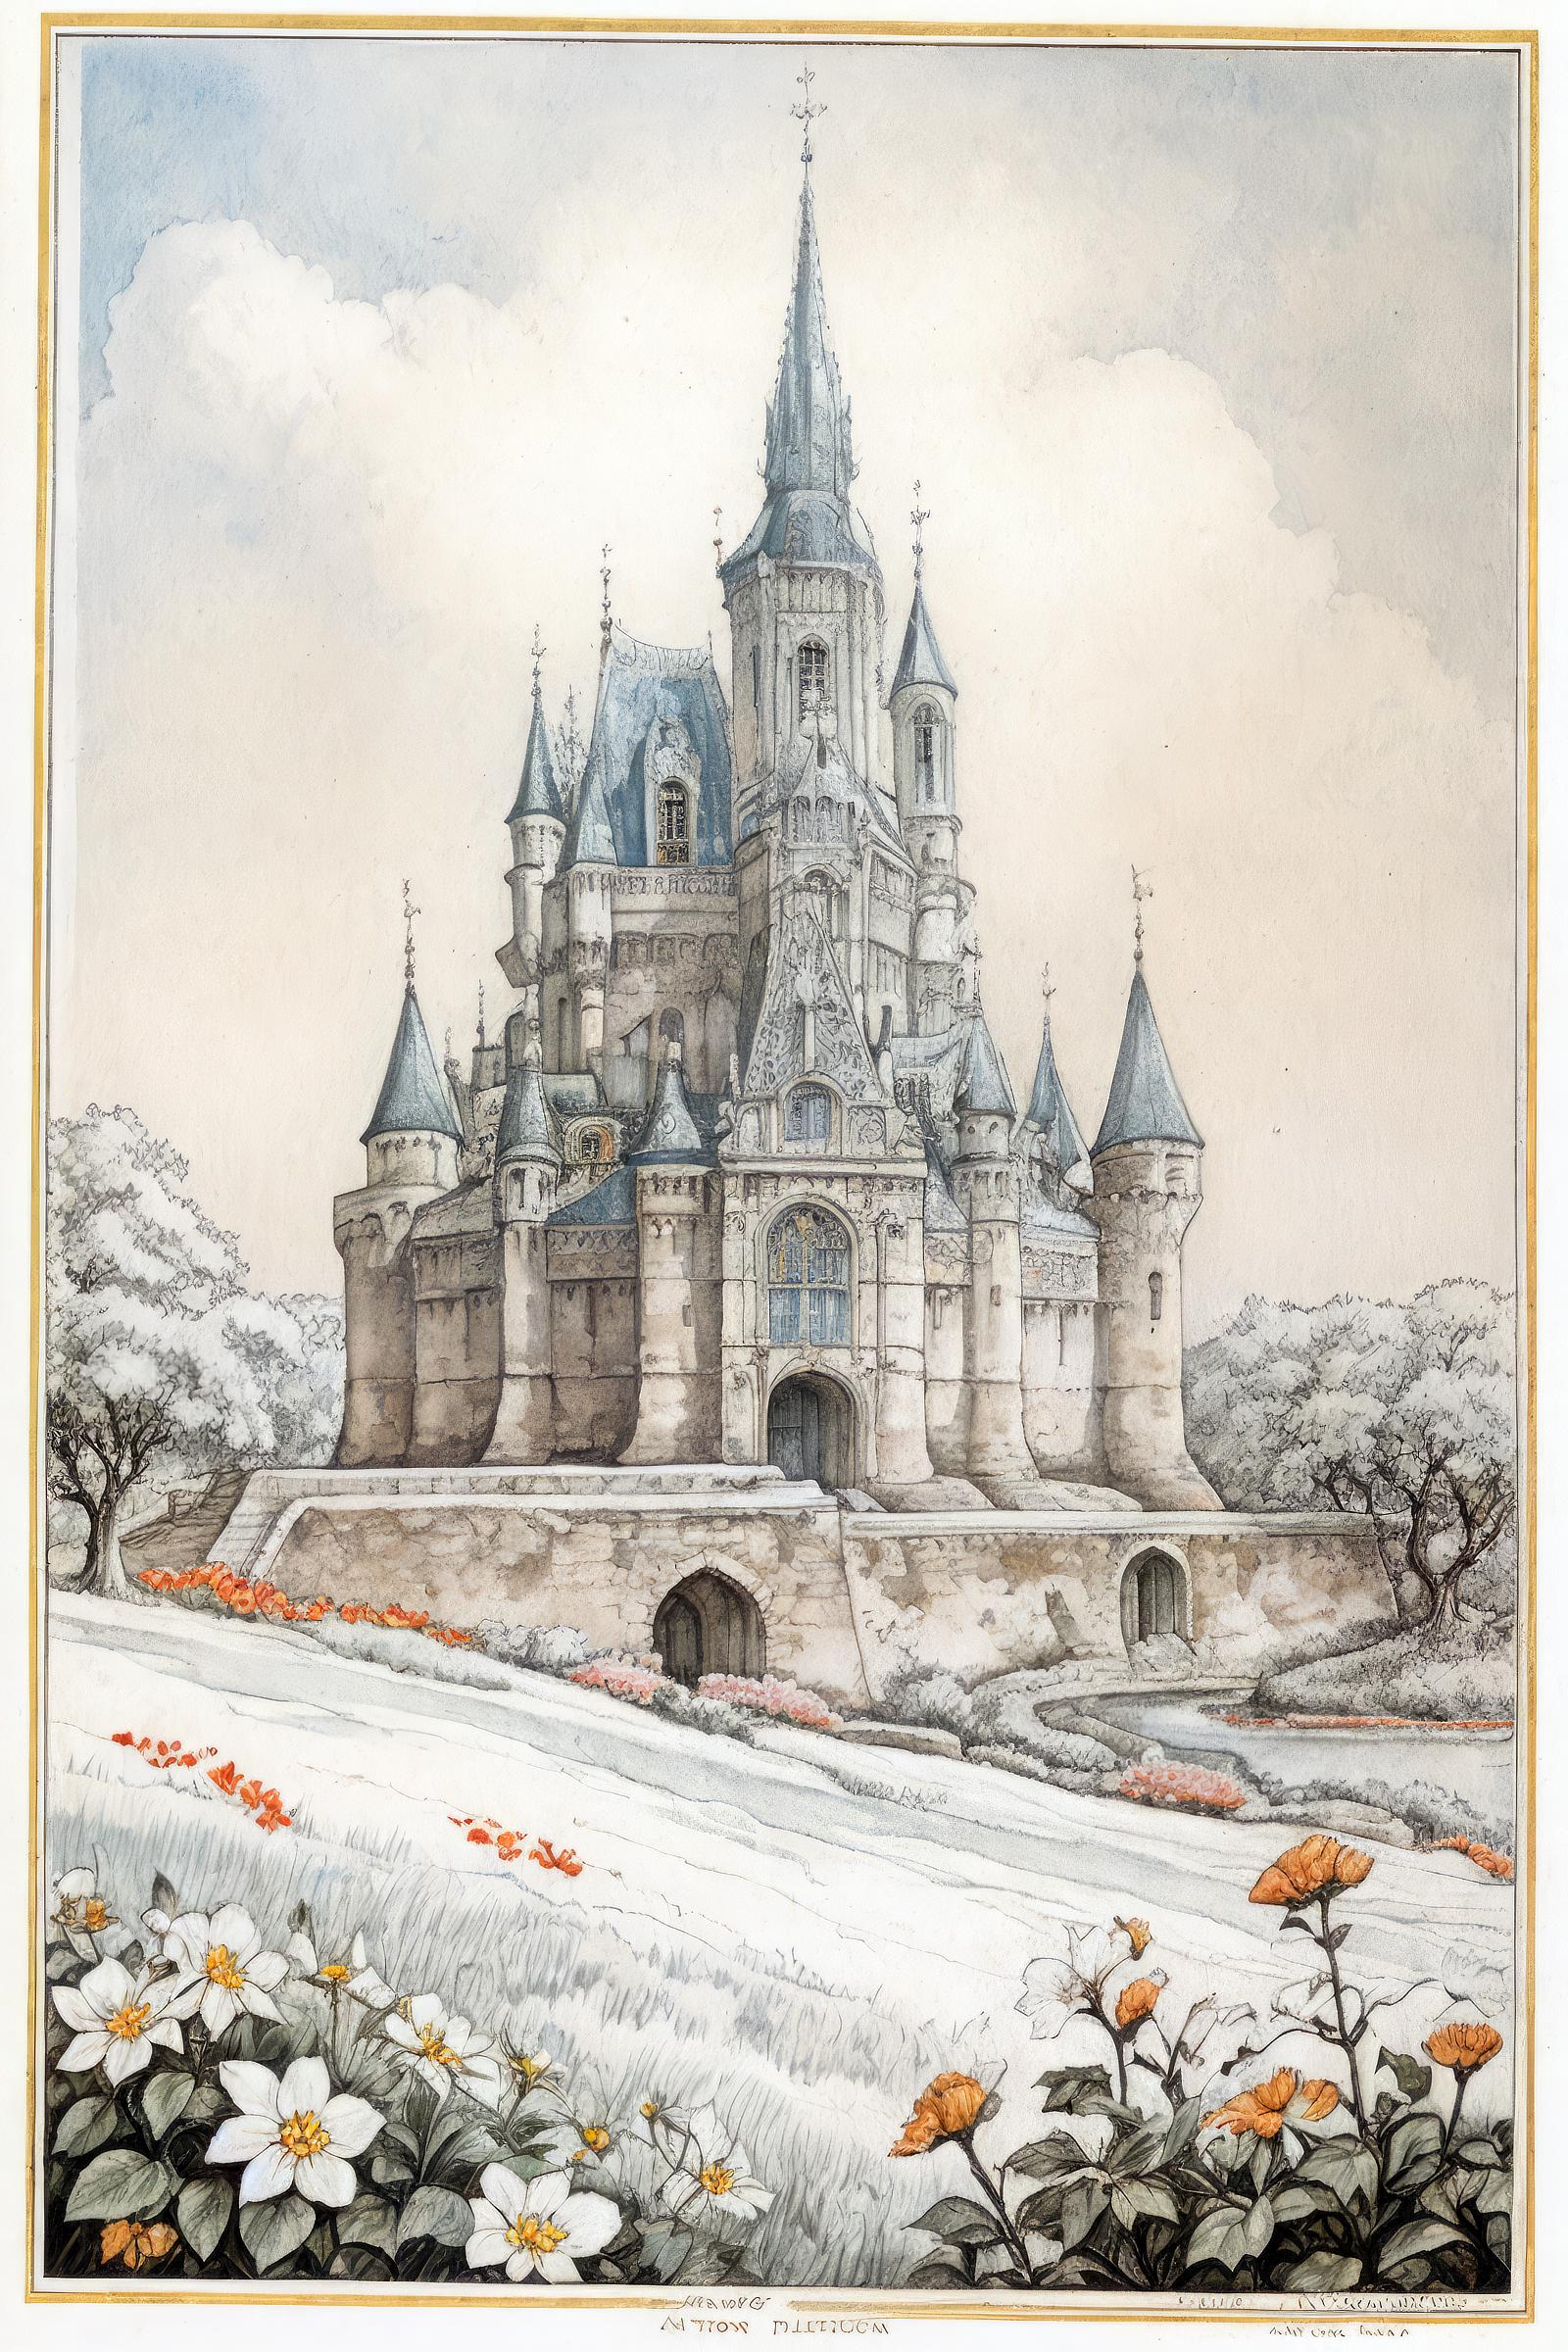 A white castle with a moat around it, with a drawing of a castle on the front.